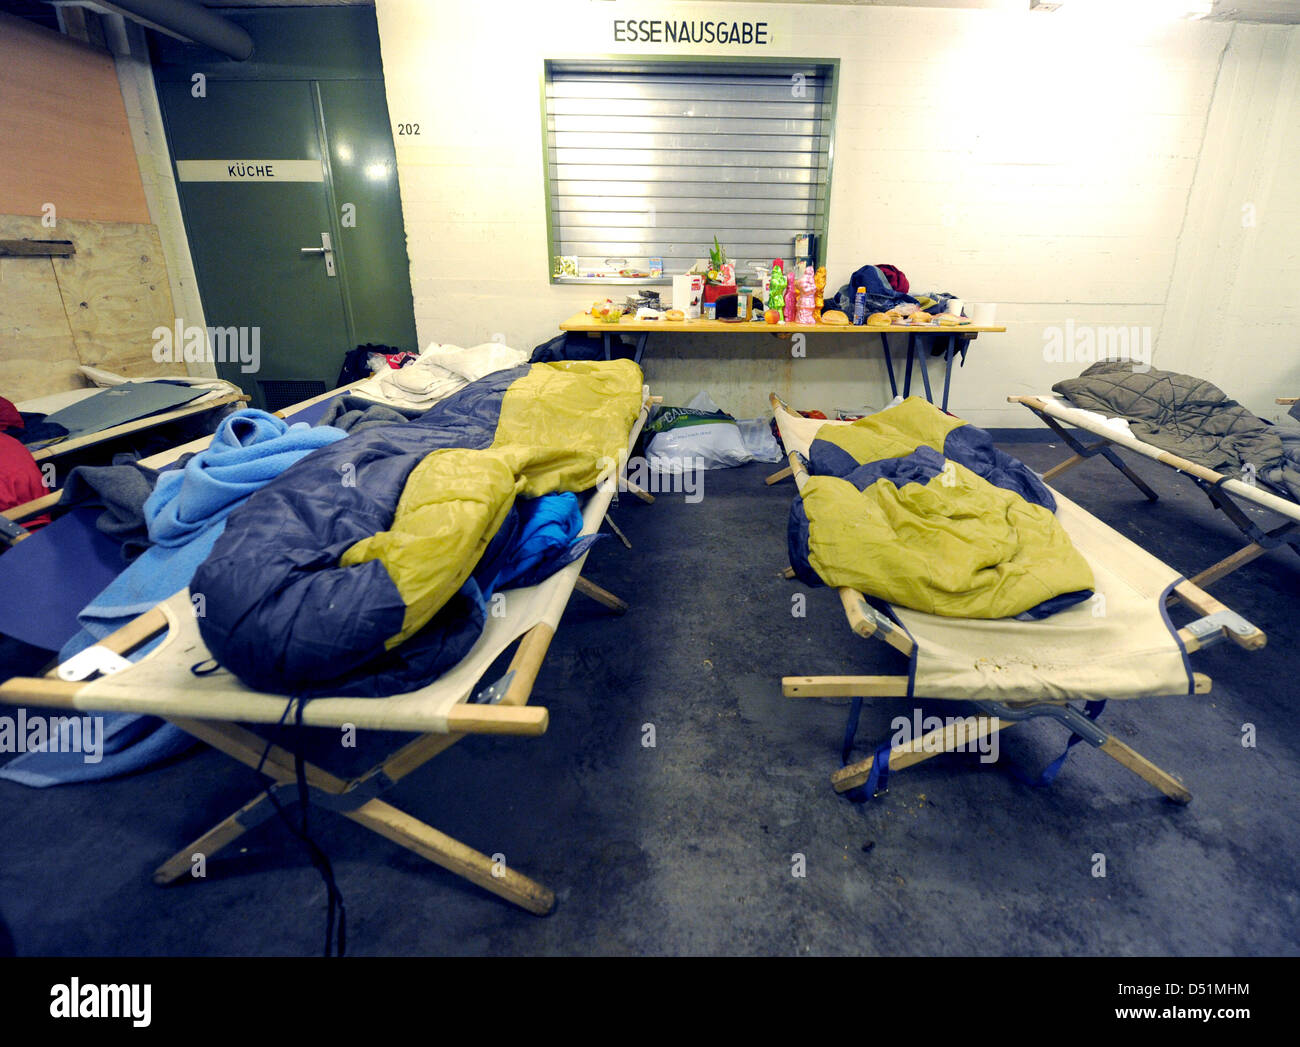 Beds stand in a bunker under the central station in which homeless can stay overnight in Hamburg, Germany, 28 December 2010. The next days are forecasted to be extremely cold which means a threat to life for homeless people. Photo: Angelika Warmuth Stock Photo